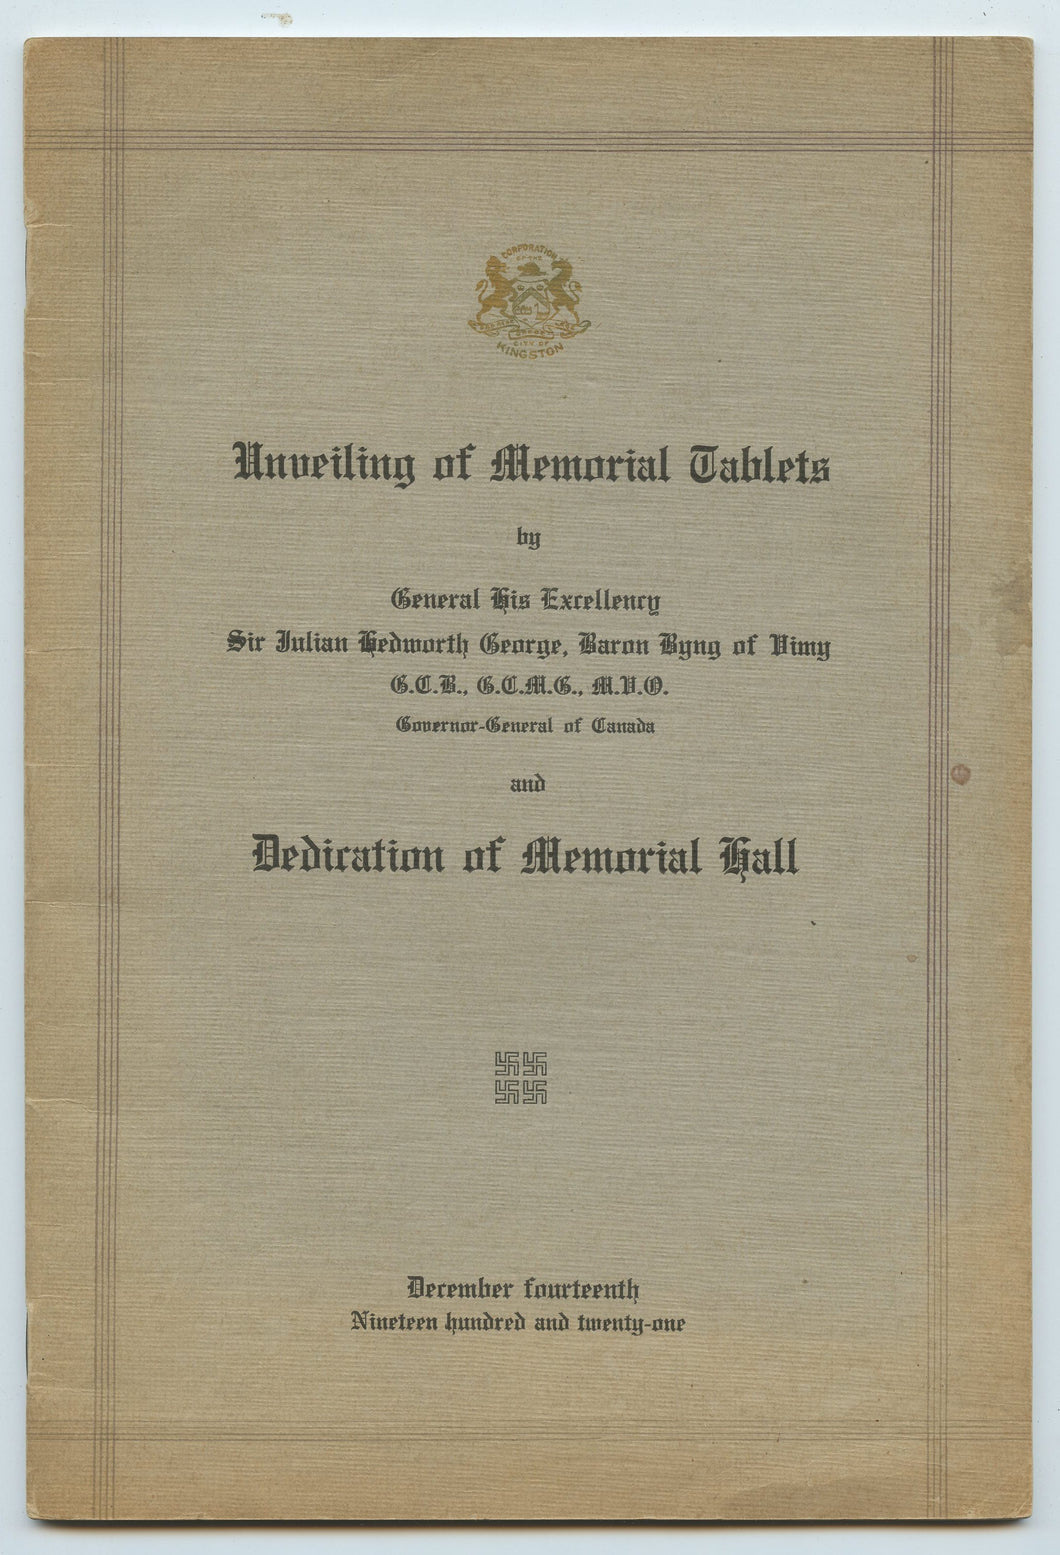 Unveiling of Memorial Tablets by General His Excellency Sir Julian Hedworth George, Baron Byng of Vimy, Governor-General of Canada and Dedication of Memorial Hall